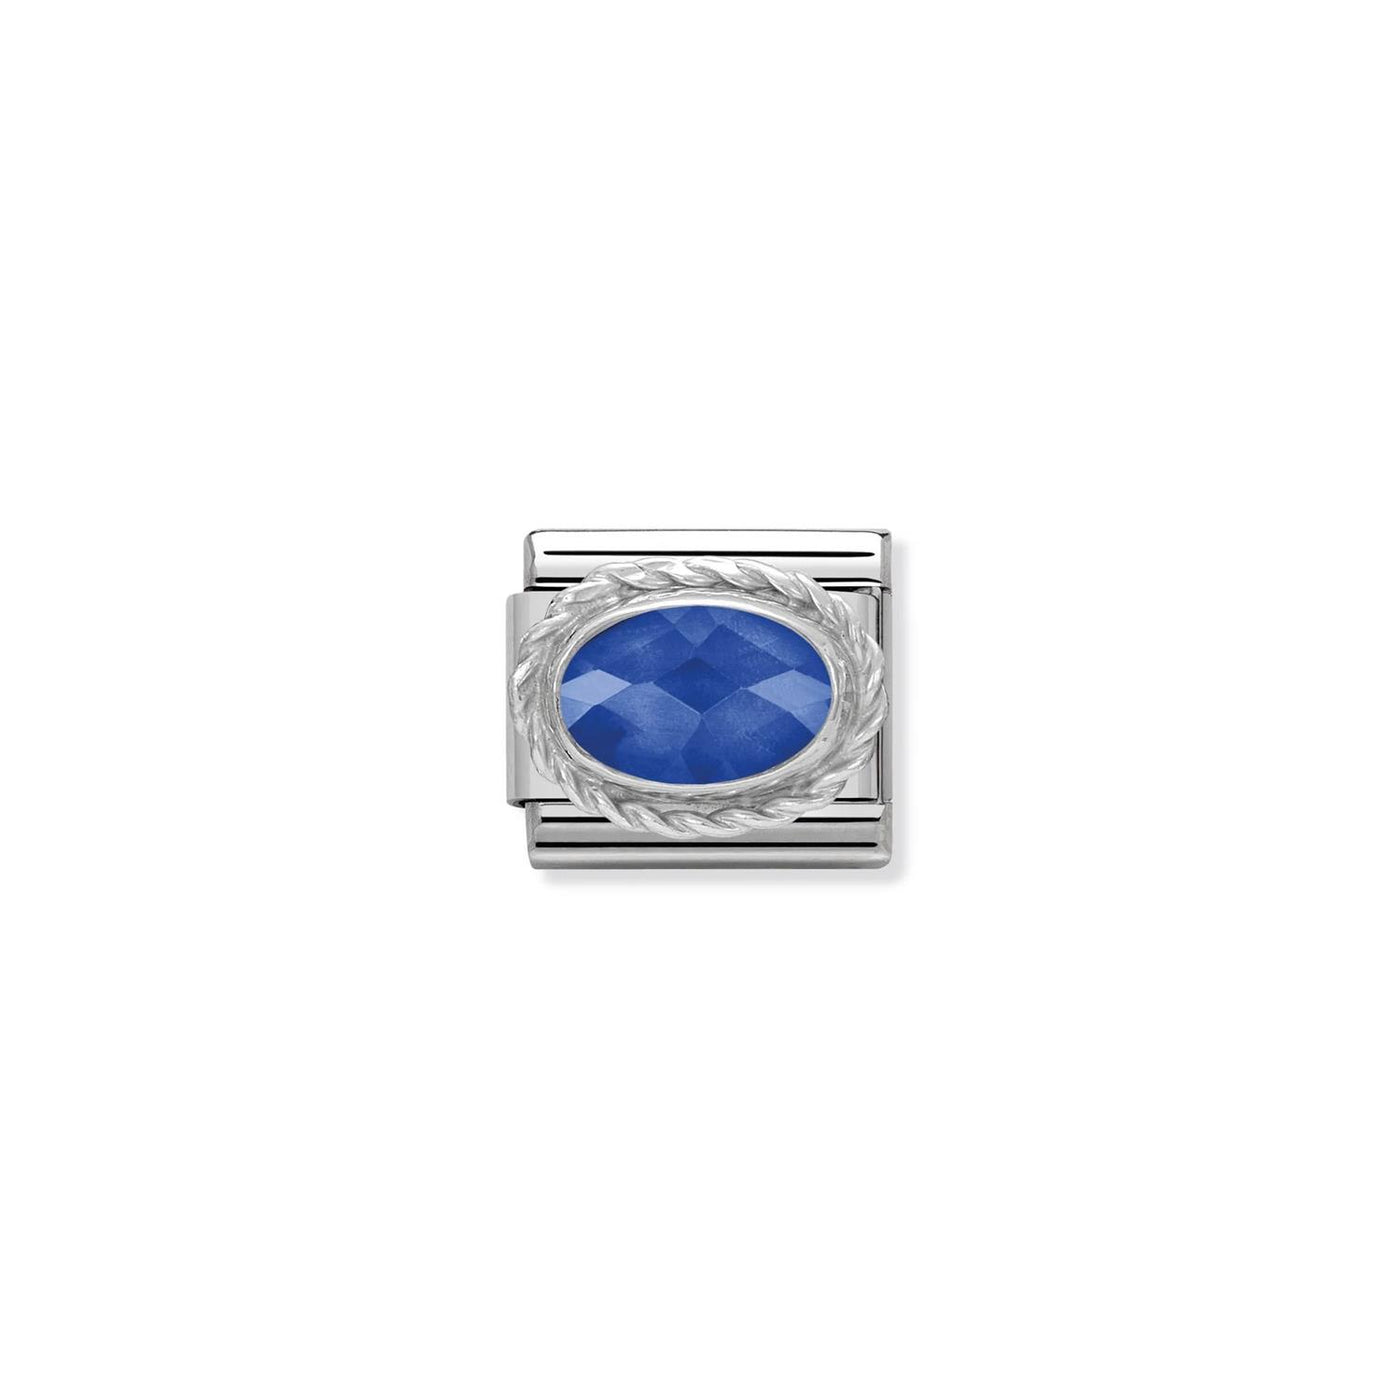 Faceted CZ 925 sterling silver setting and CZ blue